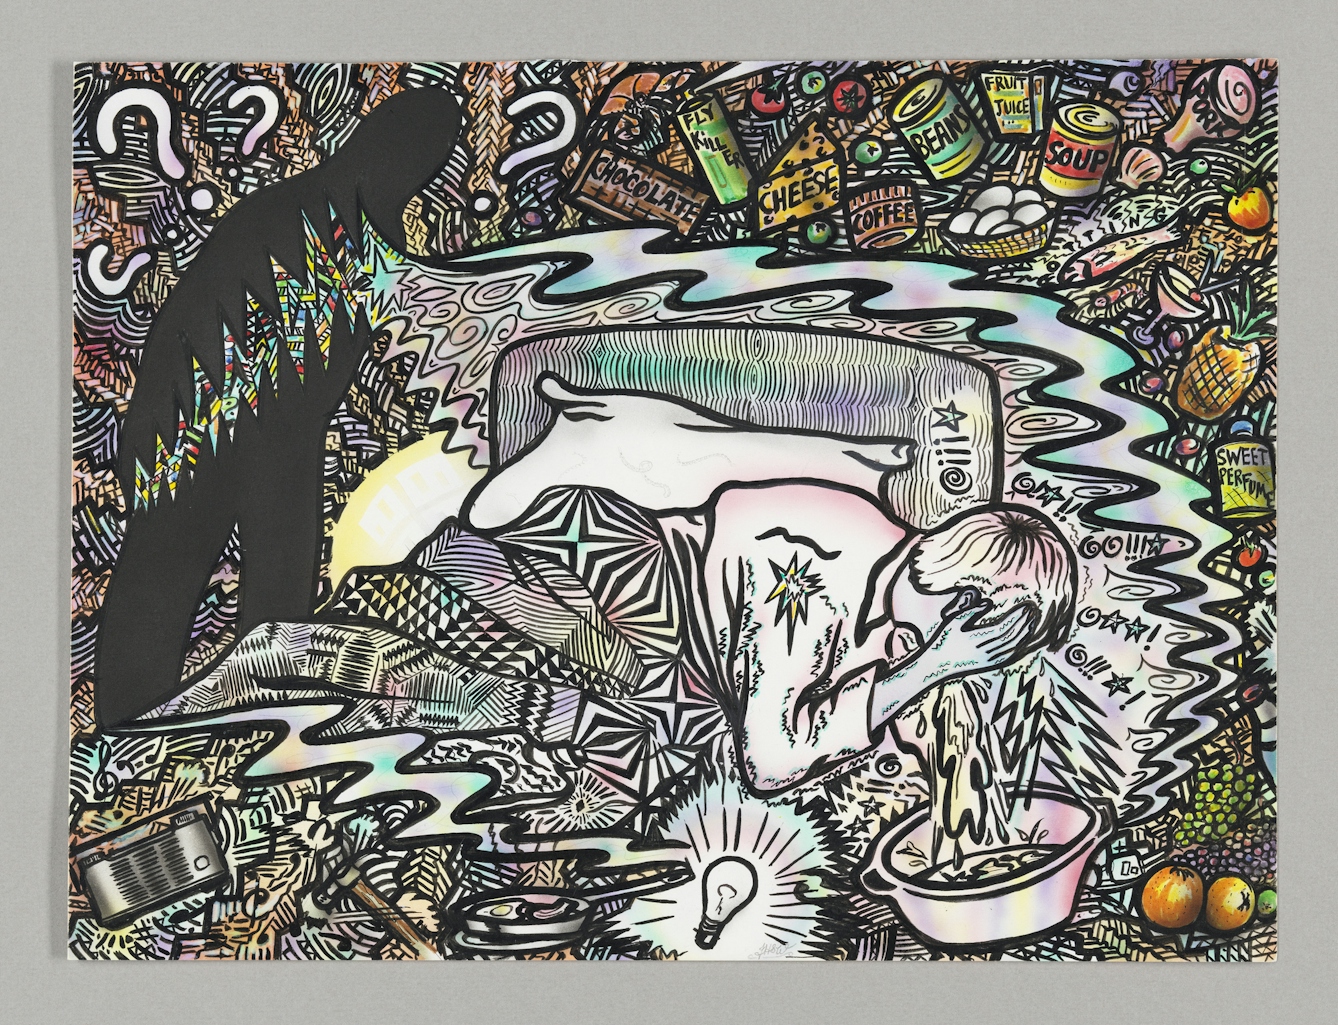 Intensely cluttered and artwork in black line drawing, coloured in details. A man lies in bed and leans over to vomit into a bowl while clutching his head. Behind him are tins of food, fruit, eggs, a cocktail, chocolate, beverages and other food. The rest of the background, merging into the bedding is zigzags and patterns of wavy lines and other graphics. An ominous silouhetted figure leans in towards the bed behind him. The figure is surrounded by question marks. A lightbulbe shines on the floor next to the bowl.